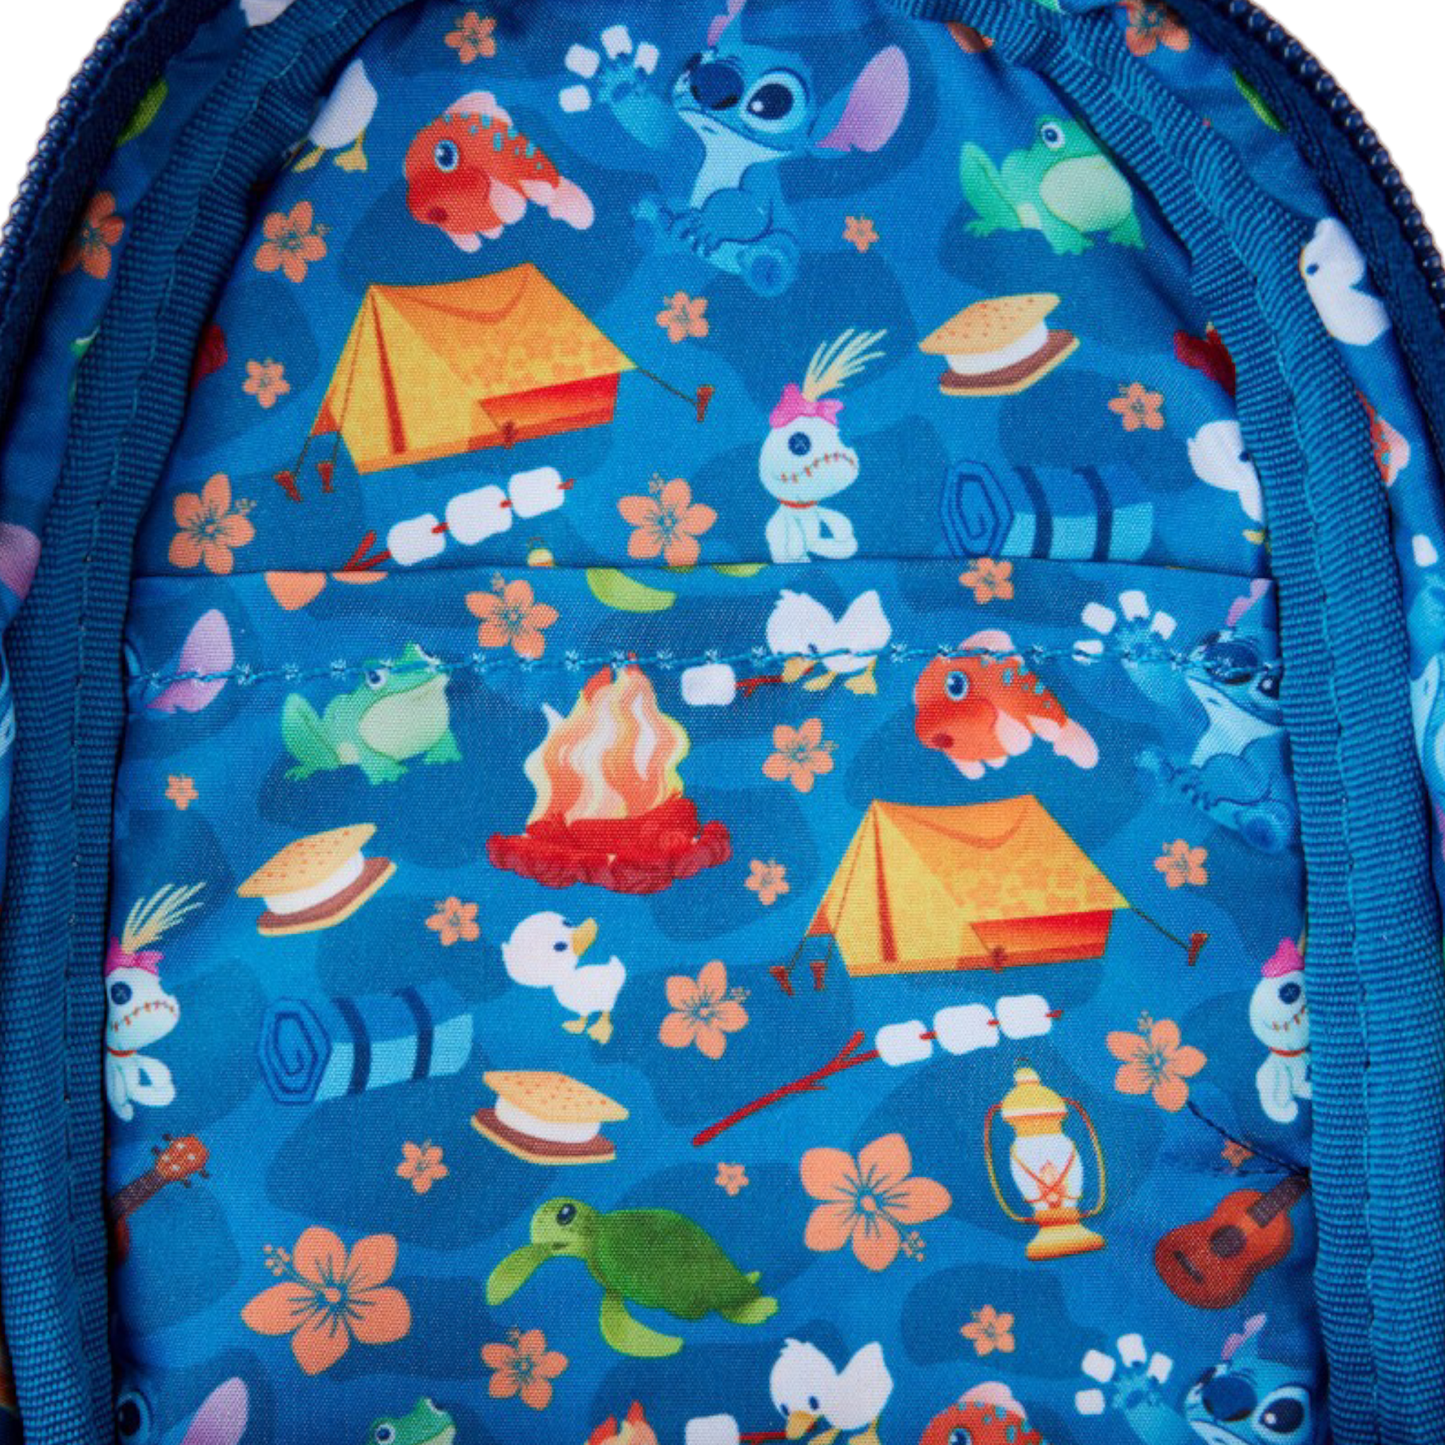 Trousse - Stitch Camping Cuties - Disney - Loungefly J'M T Créa